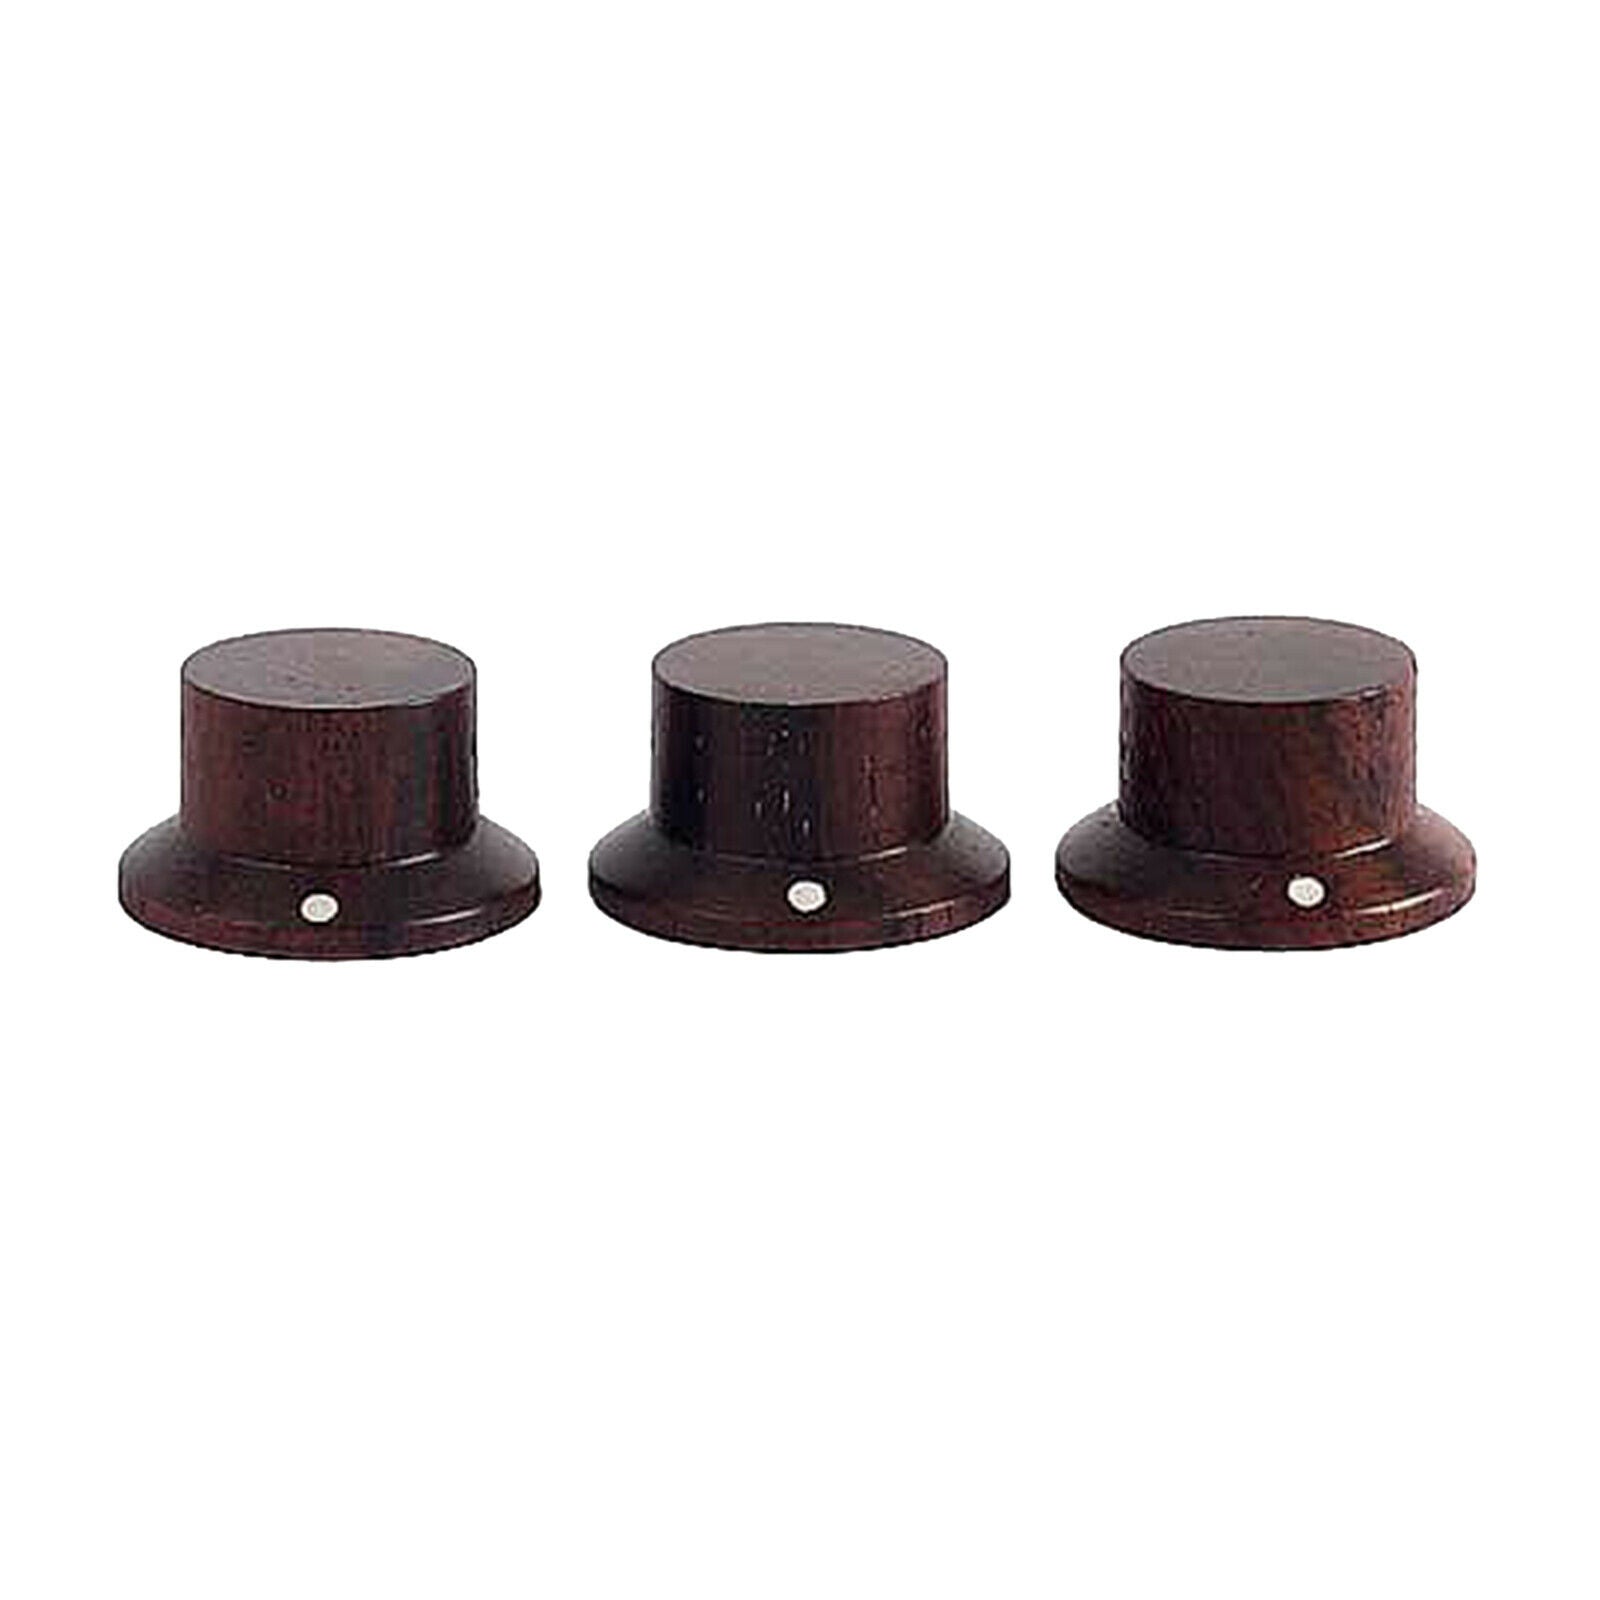 3pcs Electric Guitar Speed Knobs Control Grip Musical Instrument Spare Parts